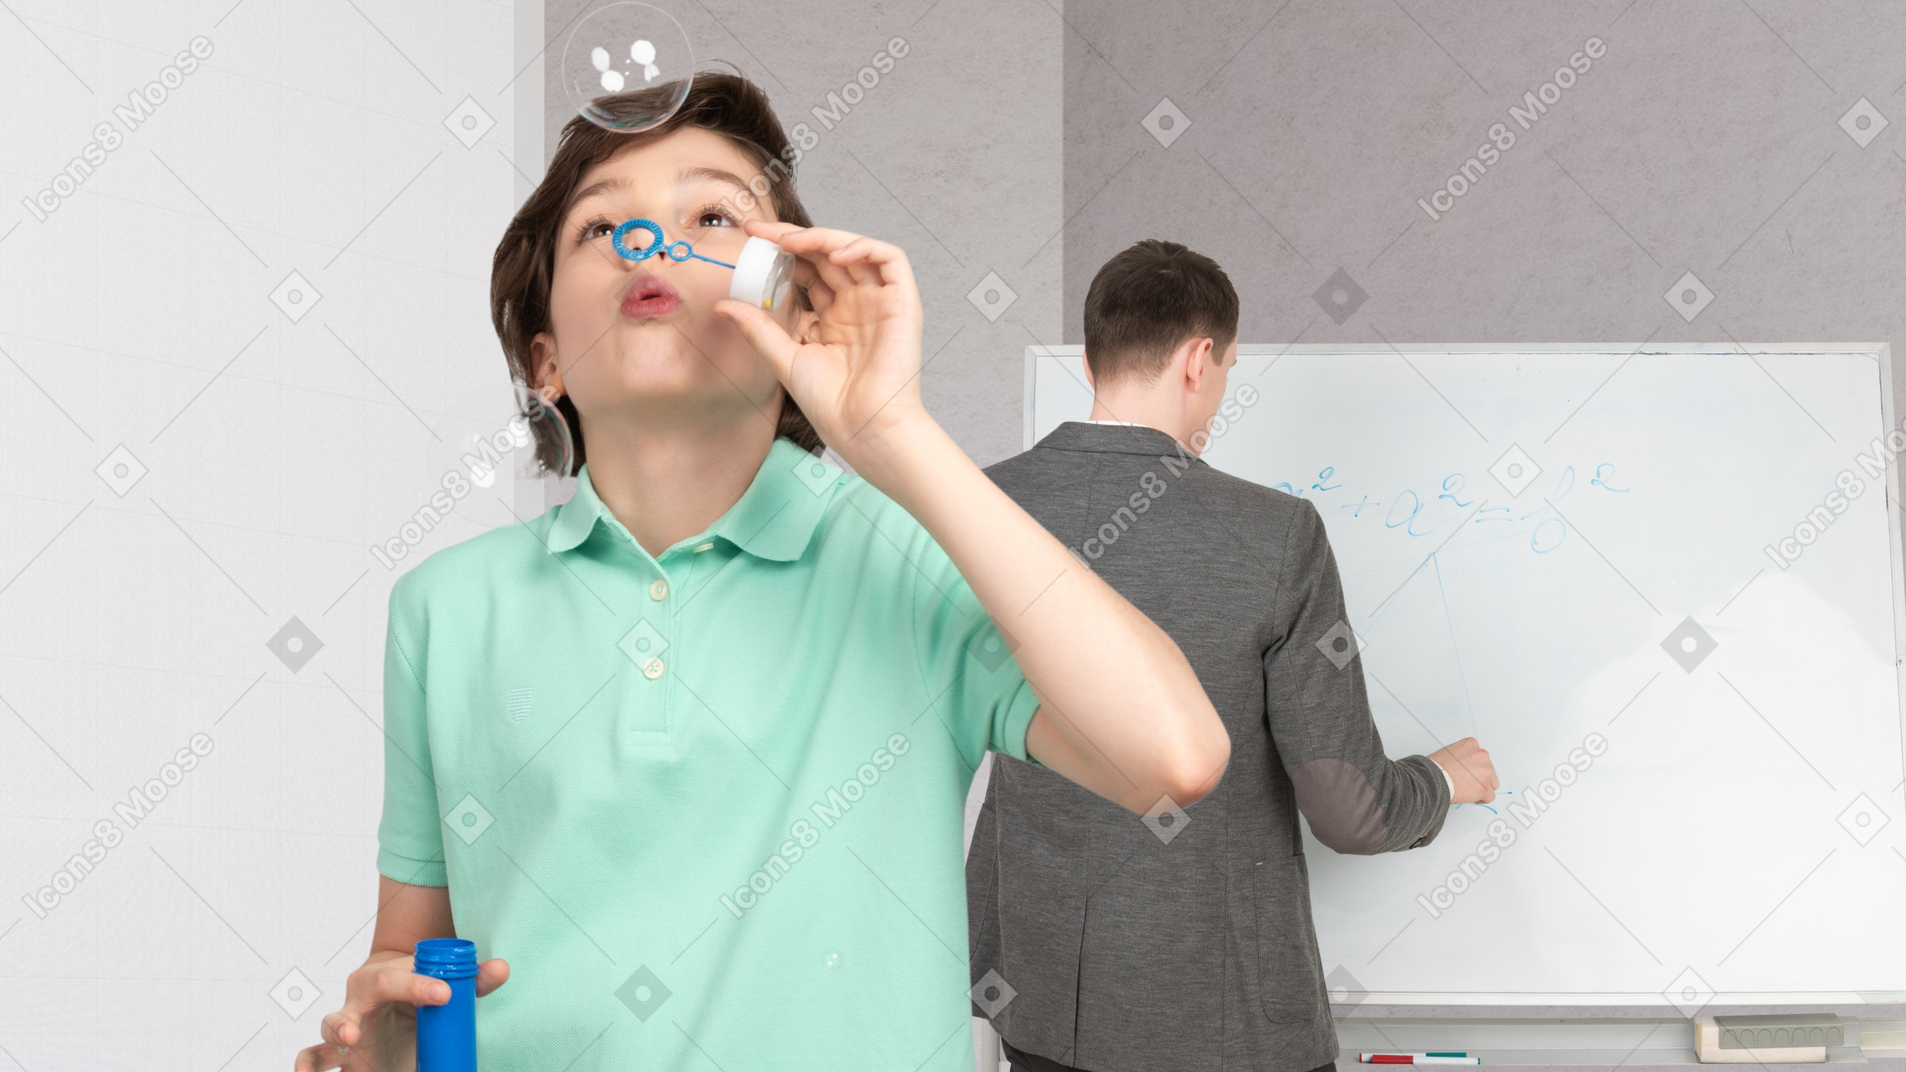 A boy blowing bubbles in front of a whiteboard